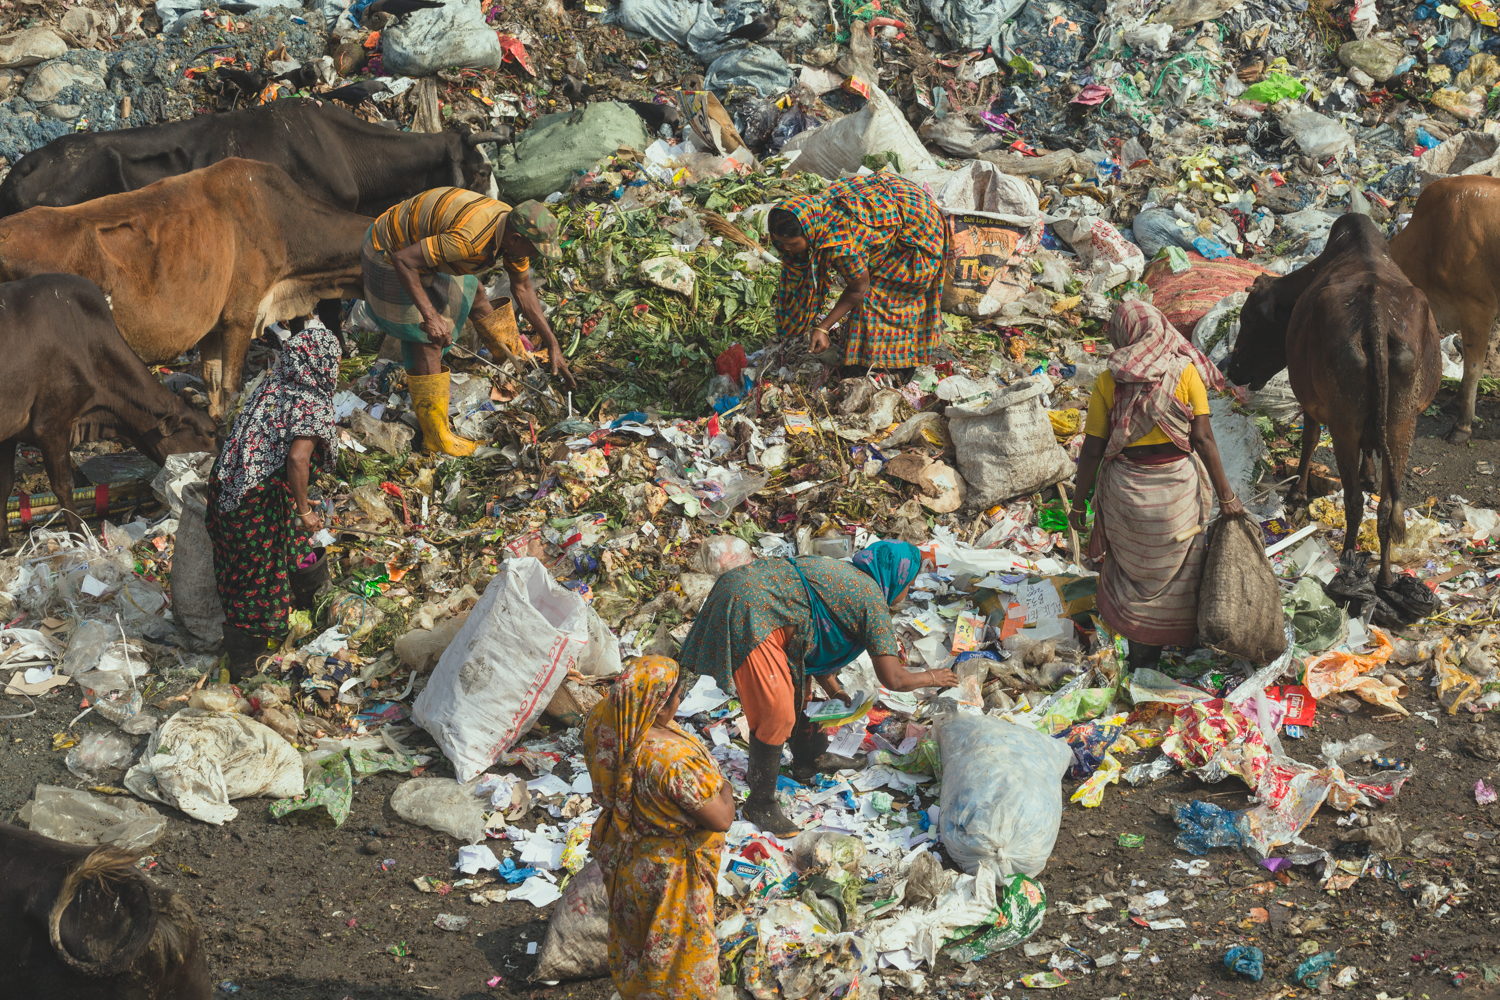 Finding items of value amongst rubbish in Chittagong, Bangladesh.